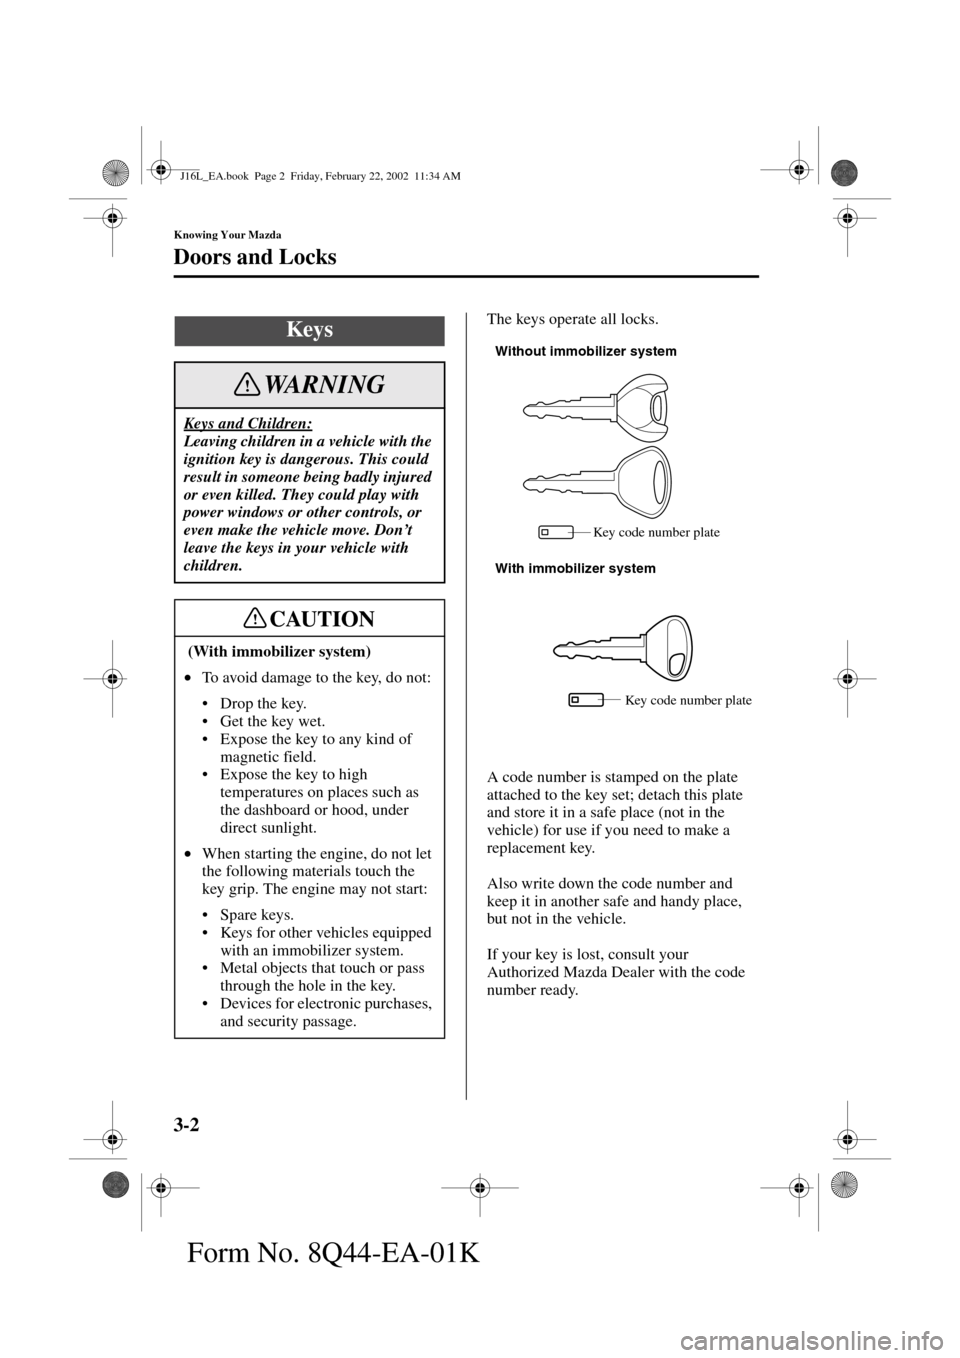 MAZDA MODEL MPV 2002  Owners Manual (in English) 3-2
Knowing Your Mazda
Form No. 8Q44-EA-01K
Doors and Locks
The keys operate all locks.
A code number is stamped on the plate 
attached to the key set; detach this plate 
and store it in a safe place 